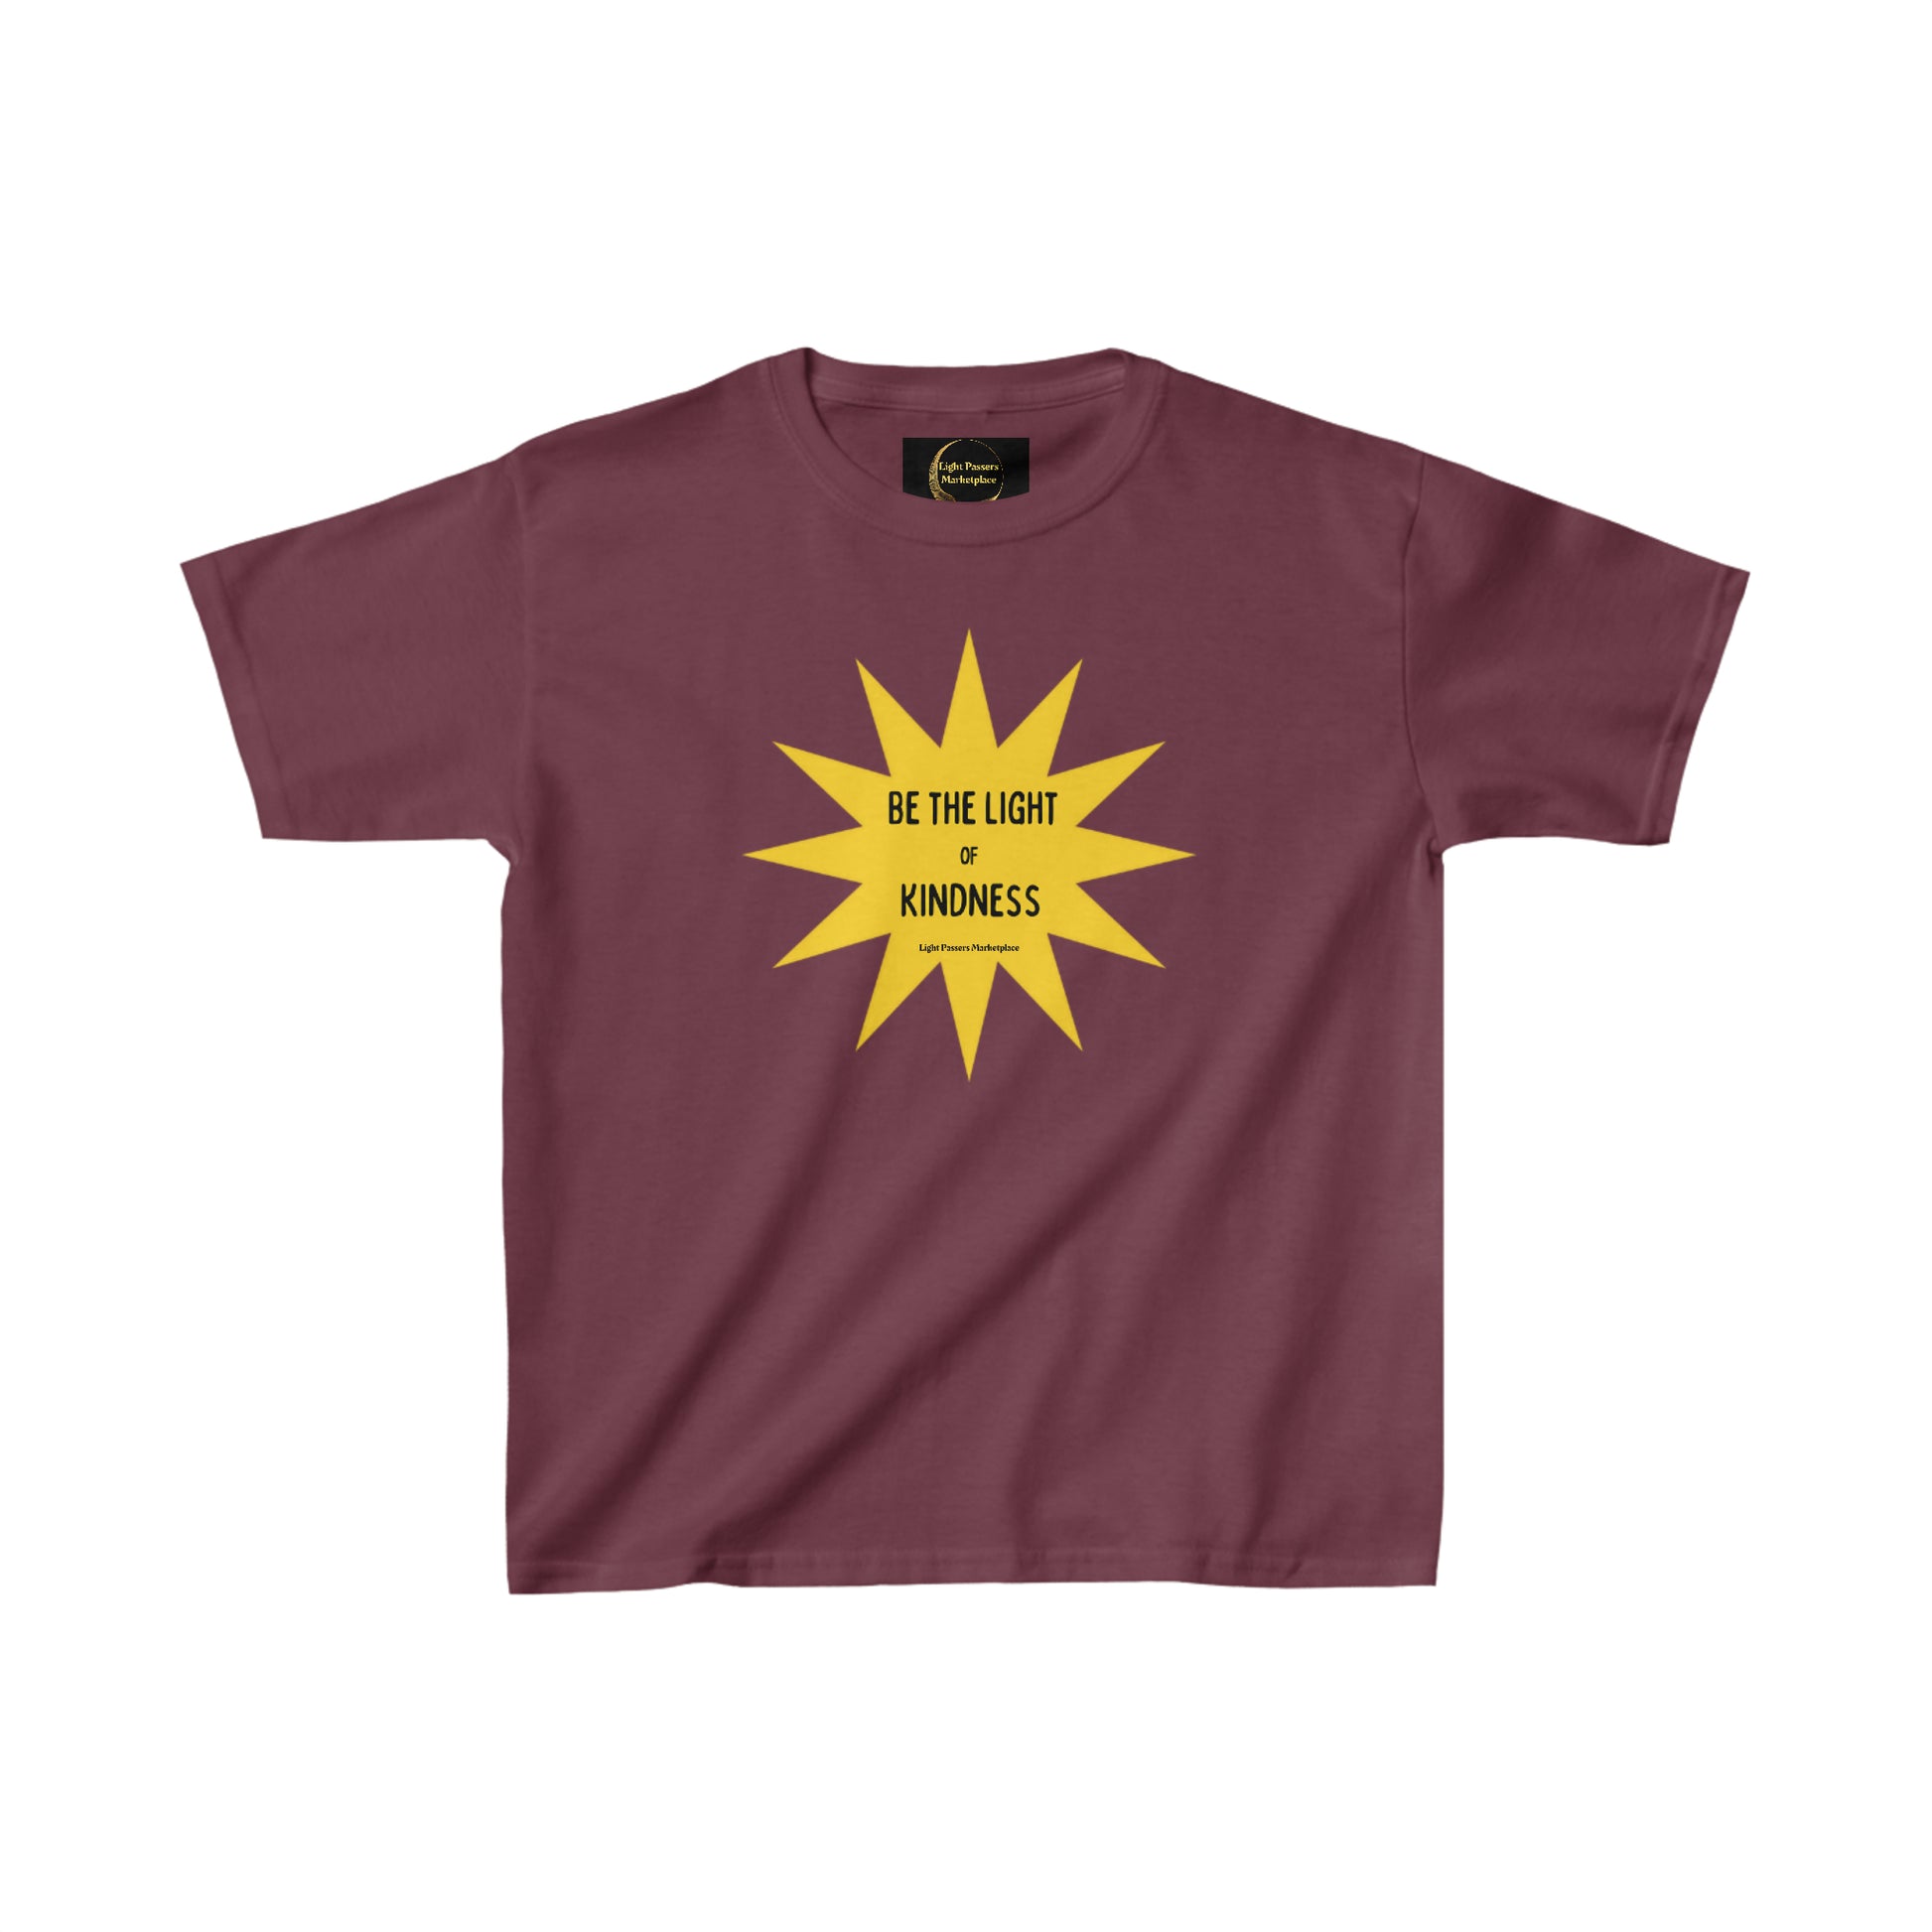 Youth cotton t-shirt featuring a yellow star and black text, ideal for everyday wear. Made of 100% cotton with twill tape shoulders and a curl-resistant collar. Classic fit, tear-away label, and no side seams.